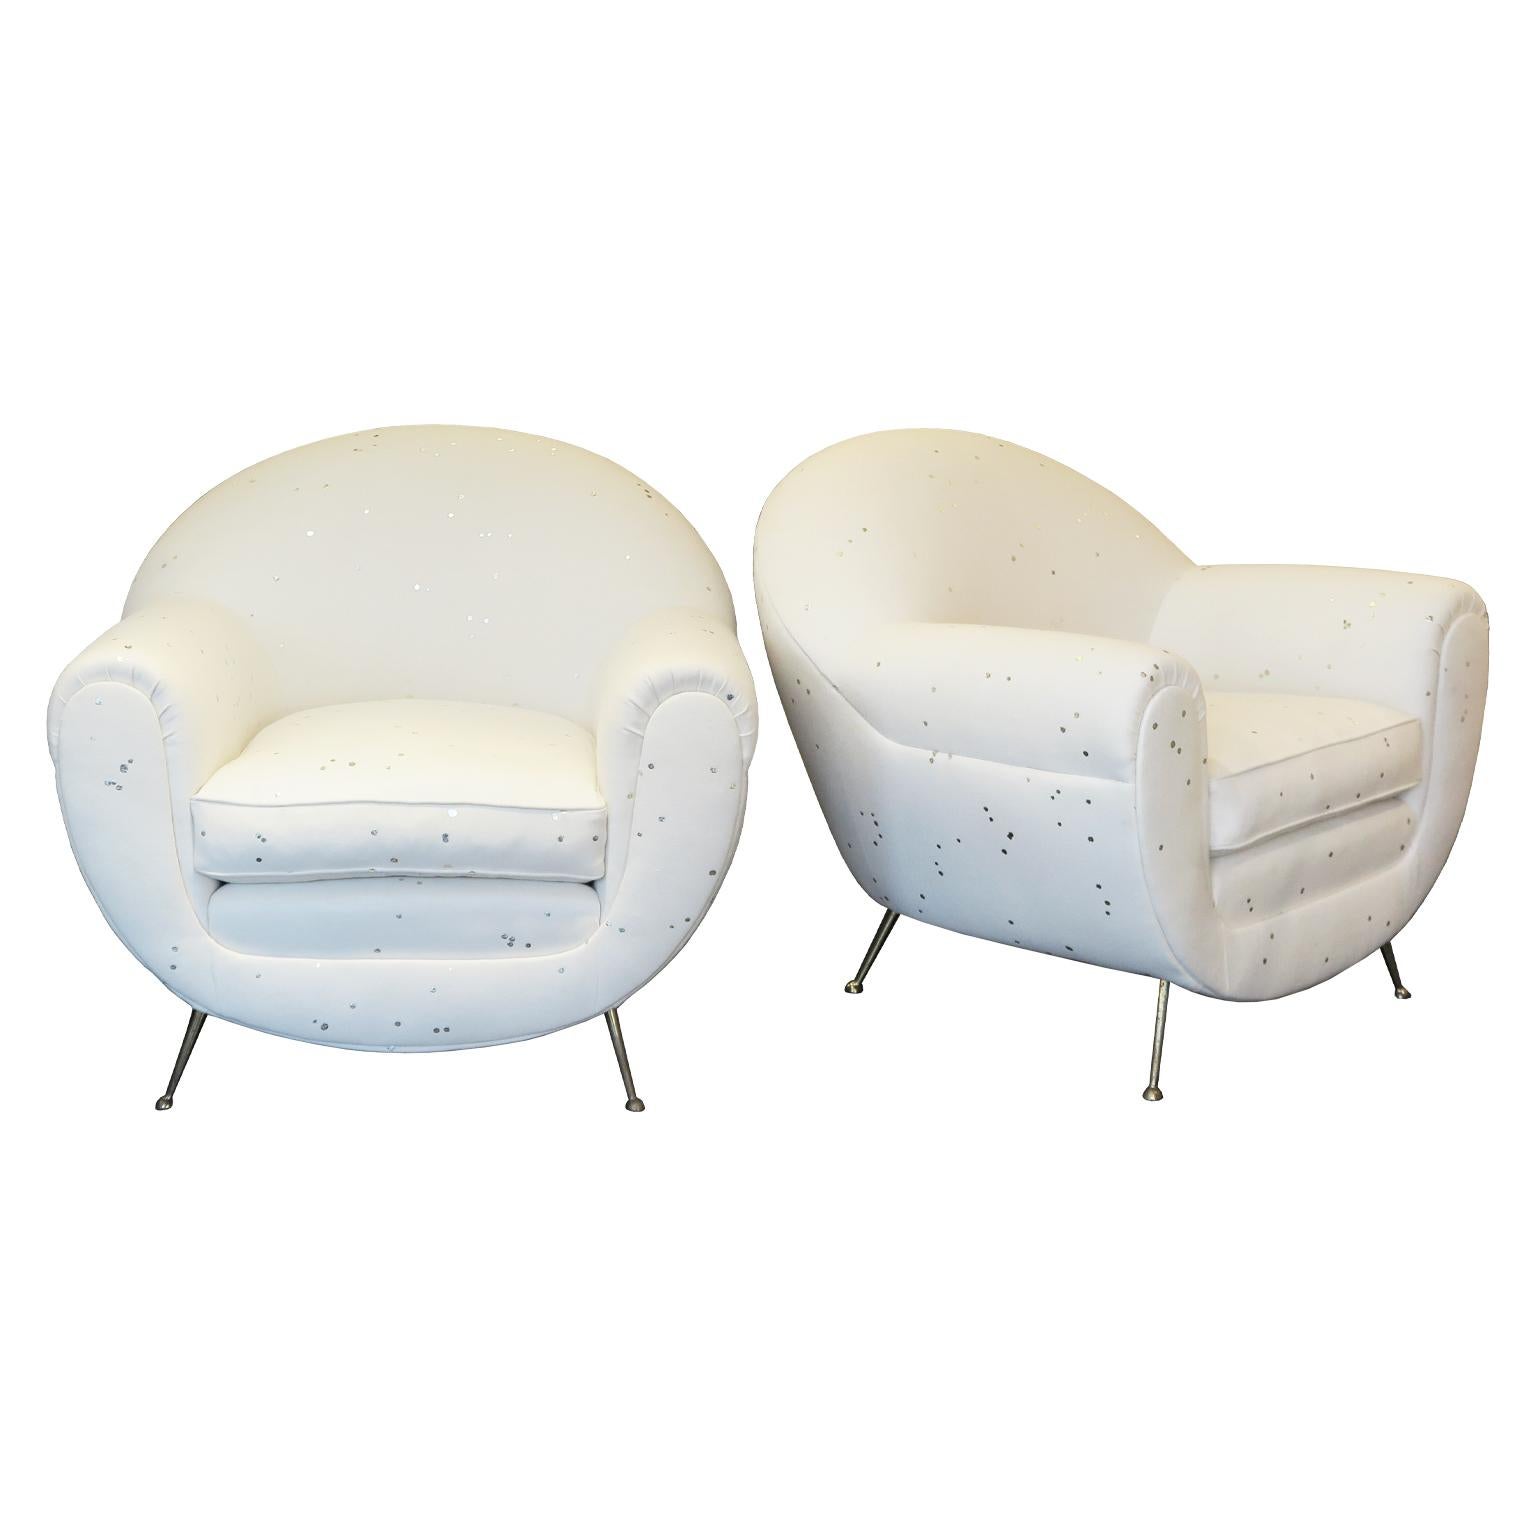 Pair of Mid-Century Italian Lounge chairs. These stylish newly upholstered armchairs feature a rounded shape with a wool fabric in a soft cream coloration with white-gold dots all around. The chair showcases tapered brass legs adding a lightness to